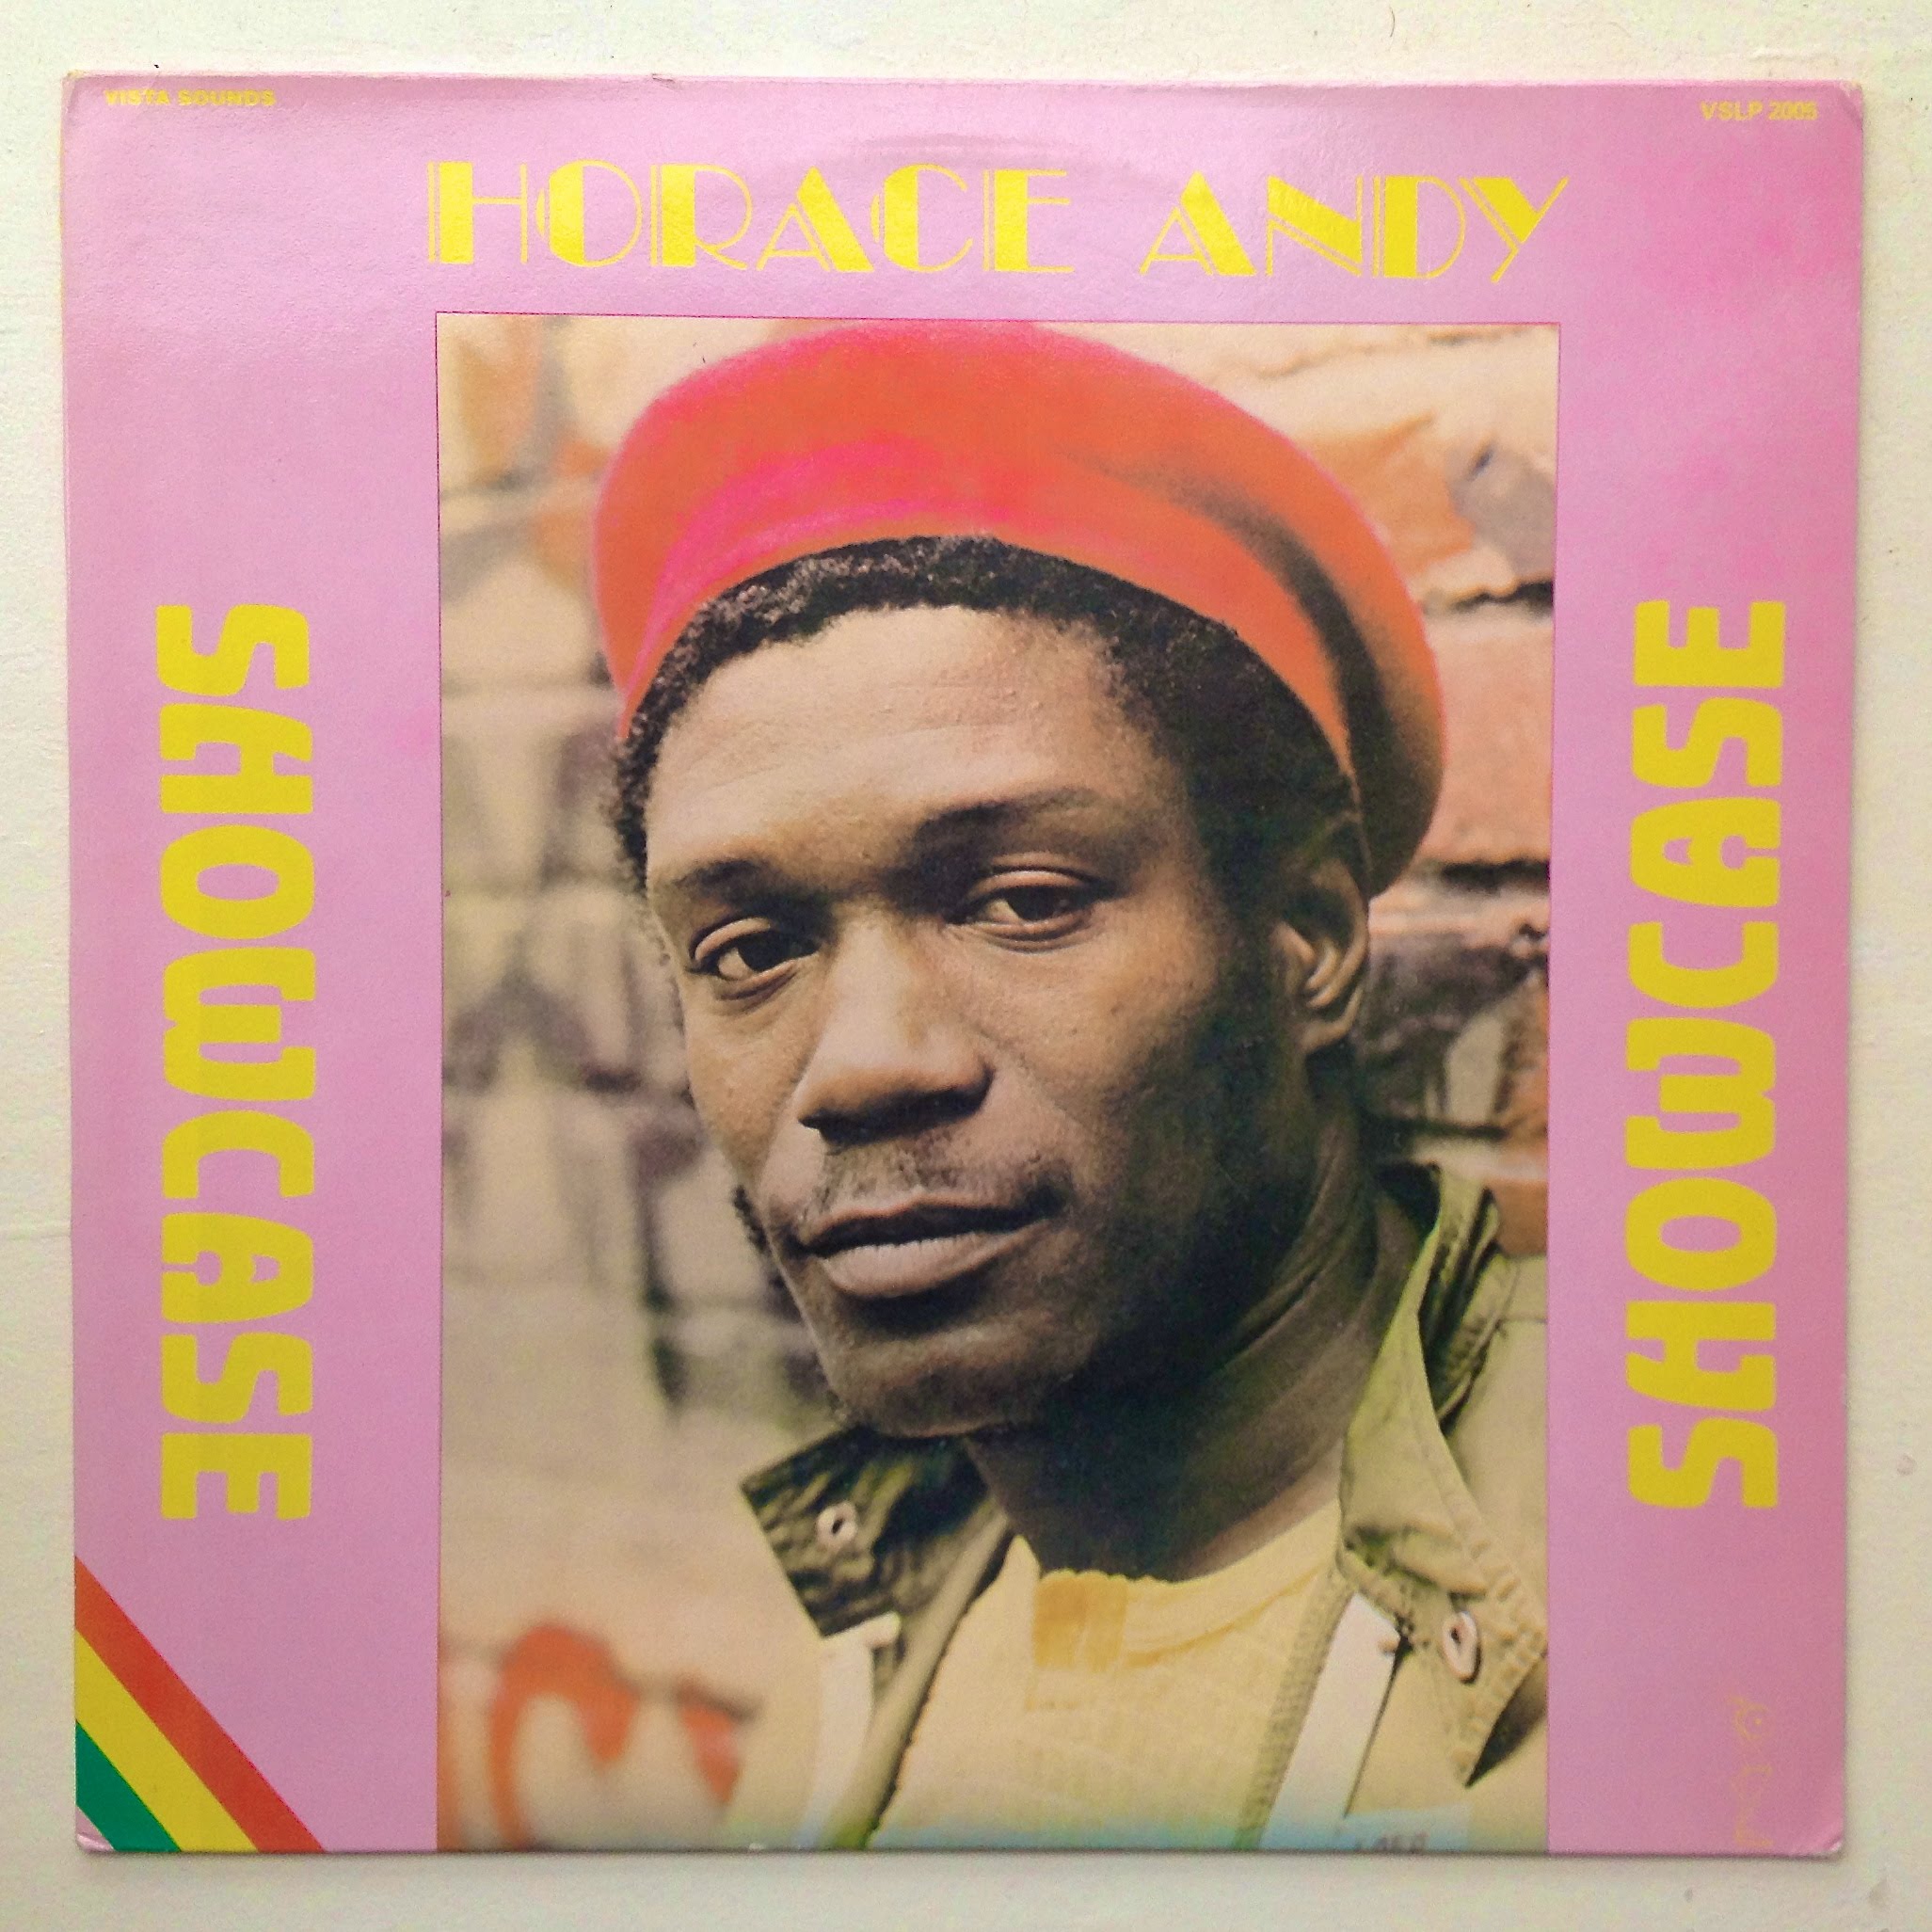 Horace Andy #23